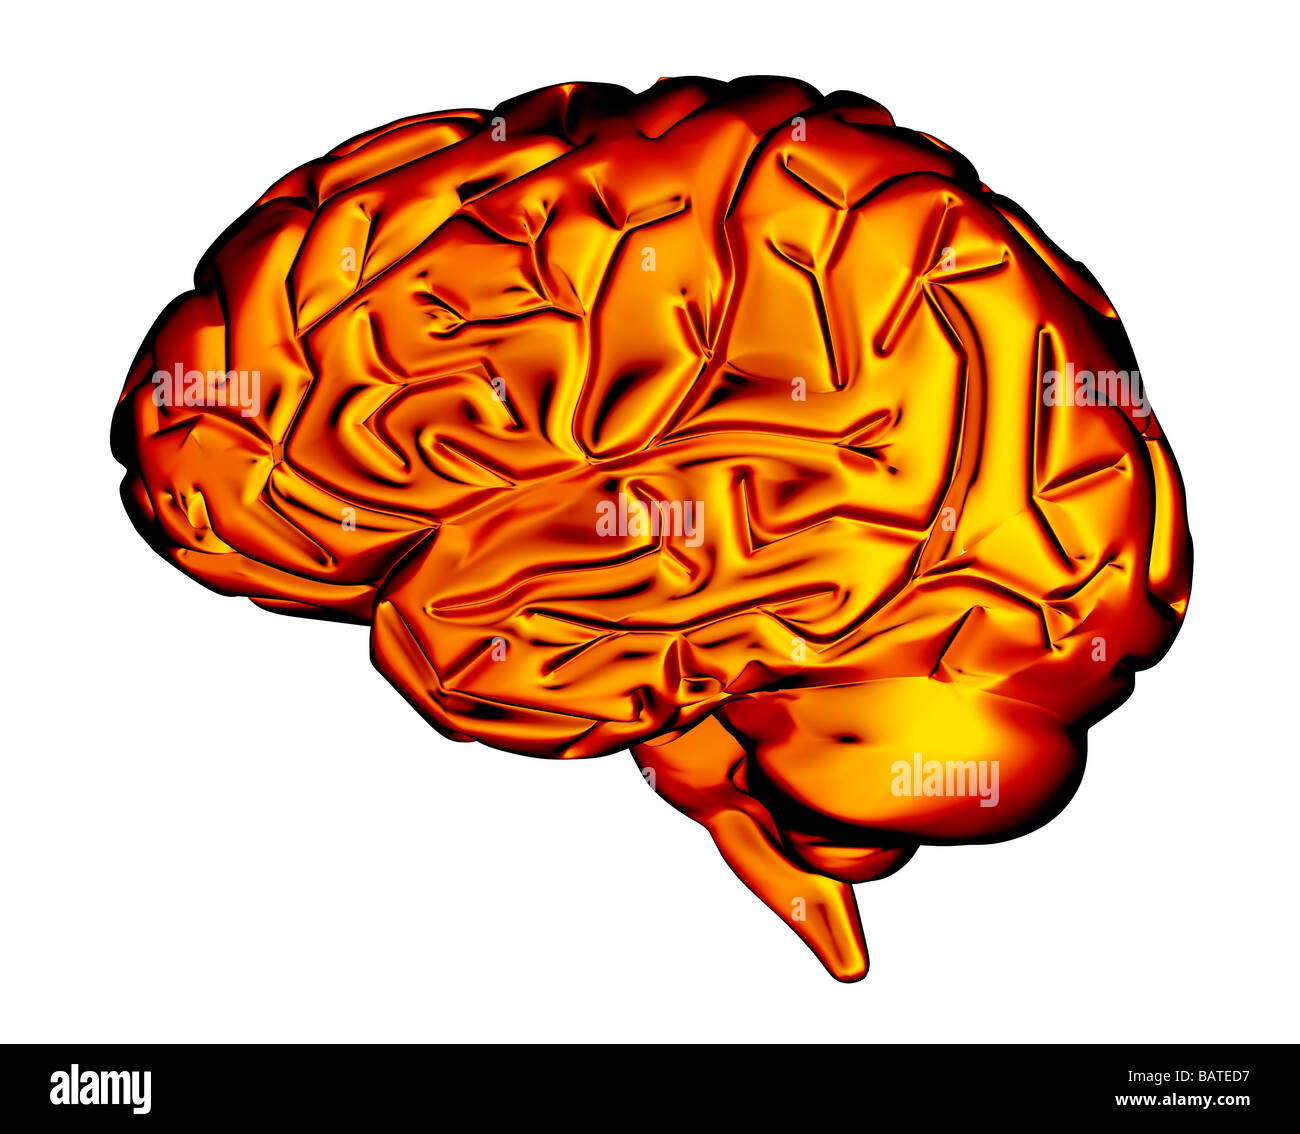 Human brain, computer artwork. The front of the brain is at left. Stock Photo